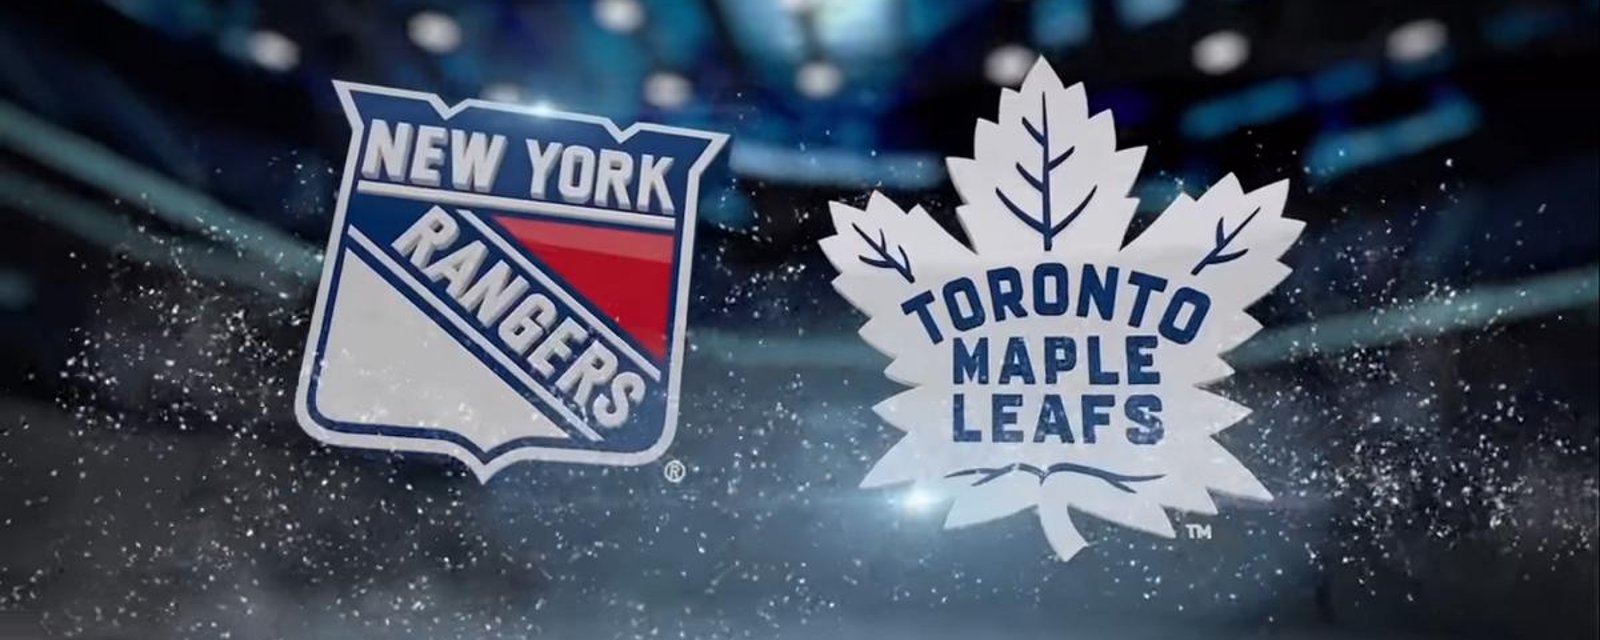 Rumors of a potential trade between the Leafs and Rangers. 